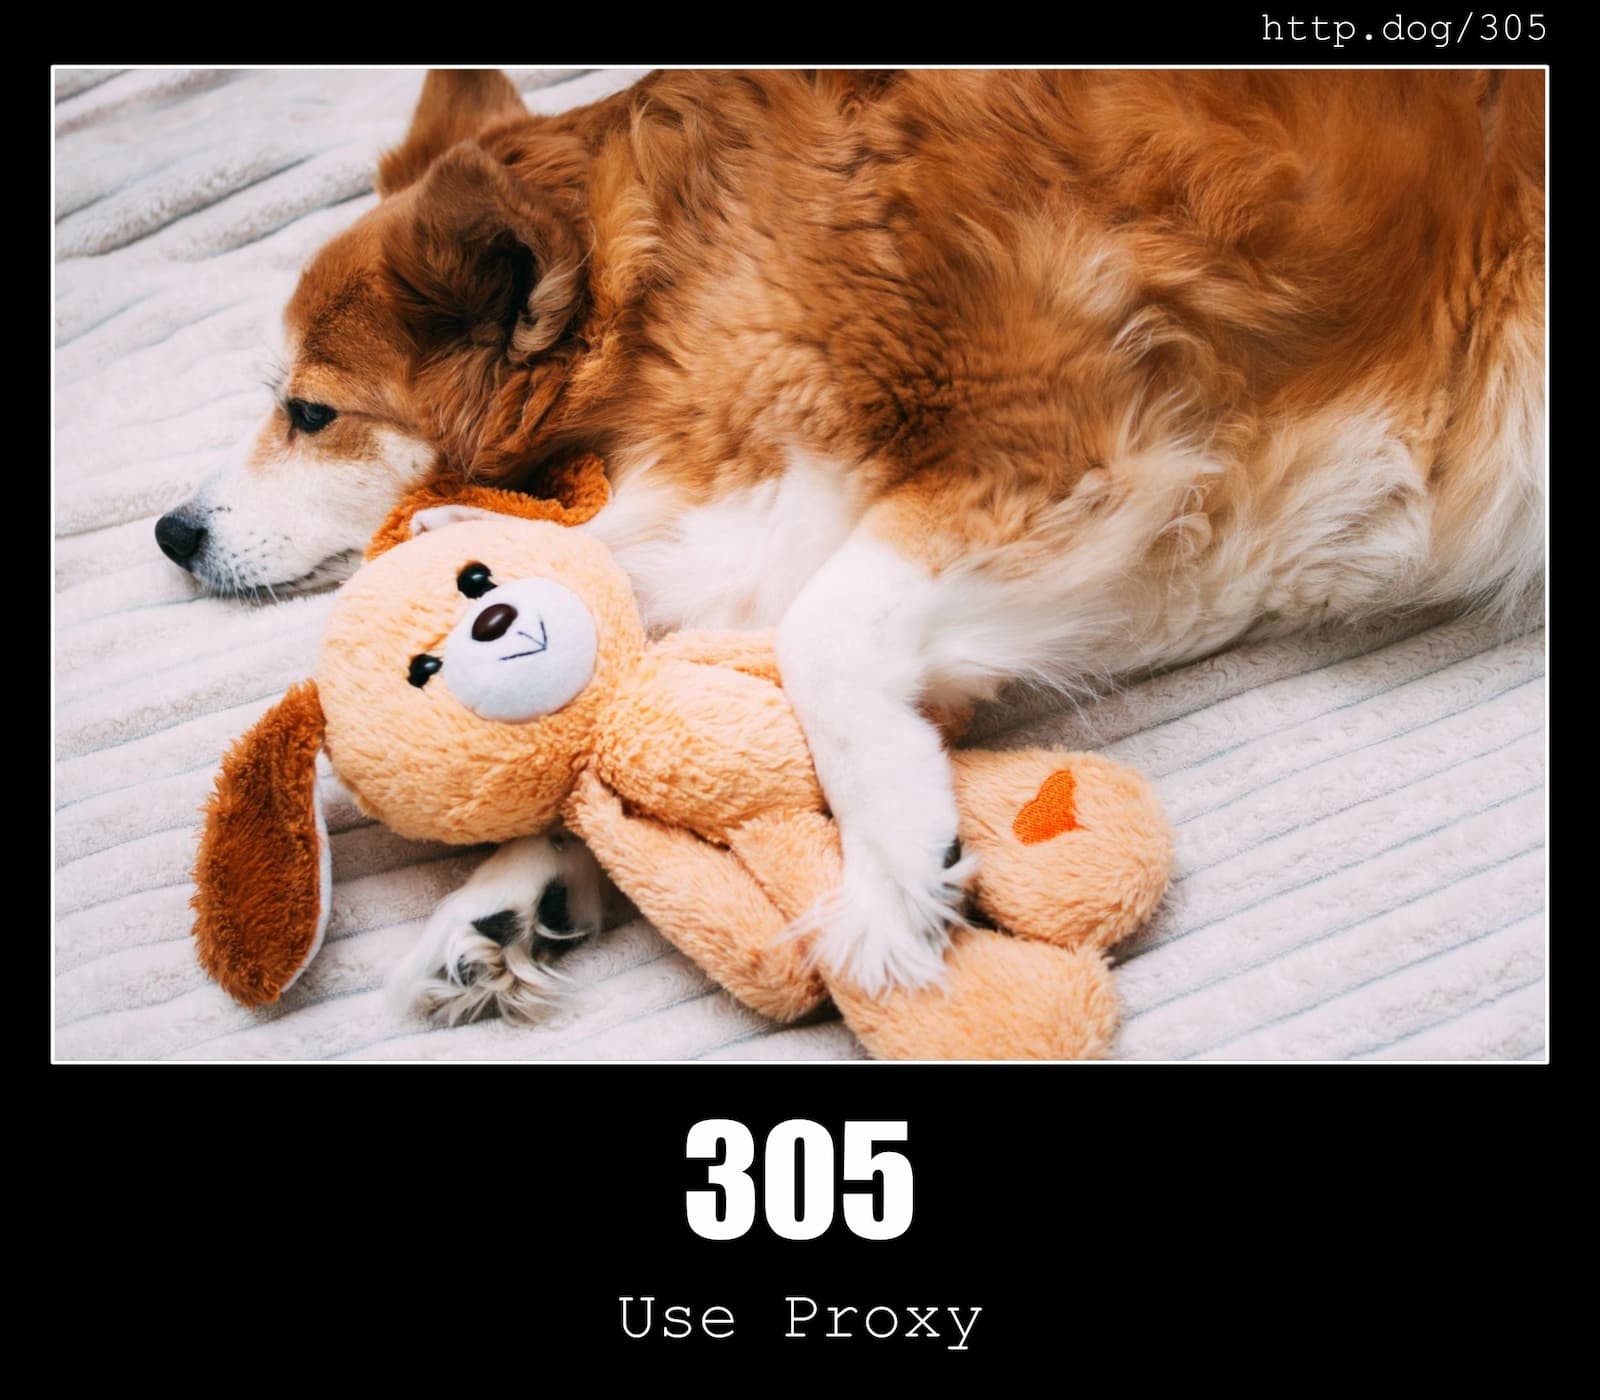 HTTP Status Code 305 Use Proxy & Dogs